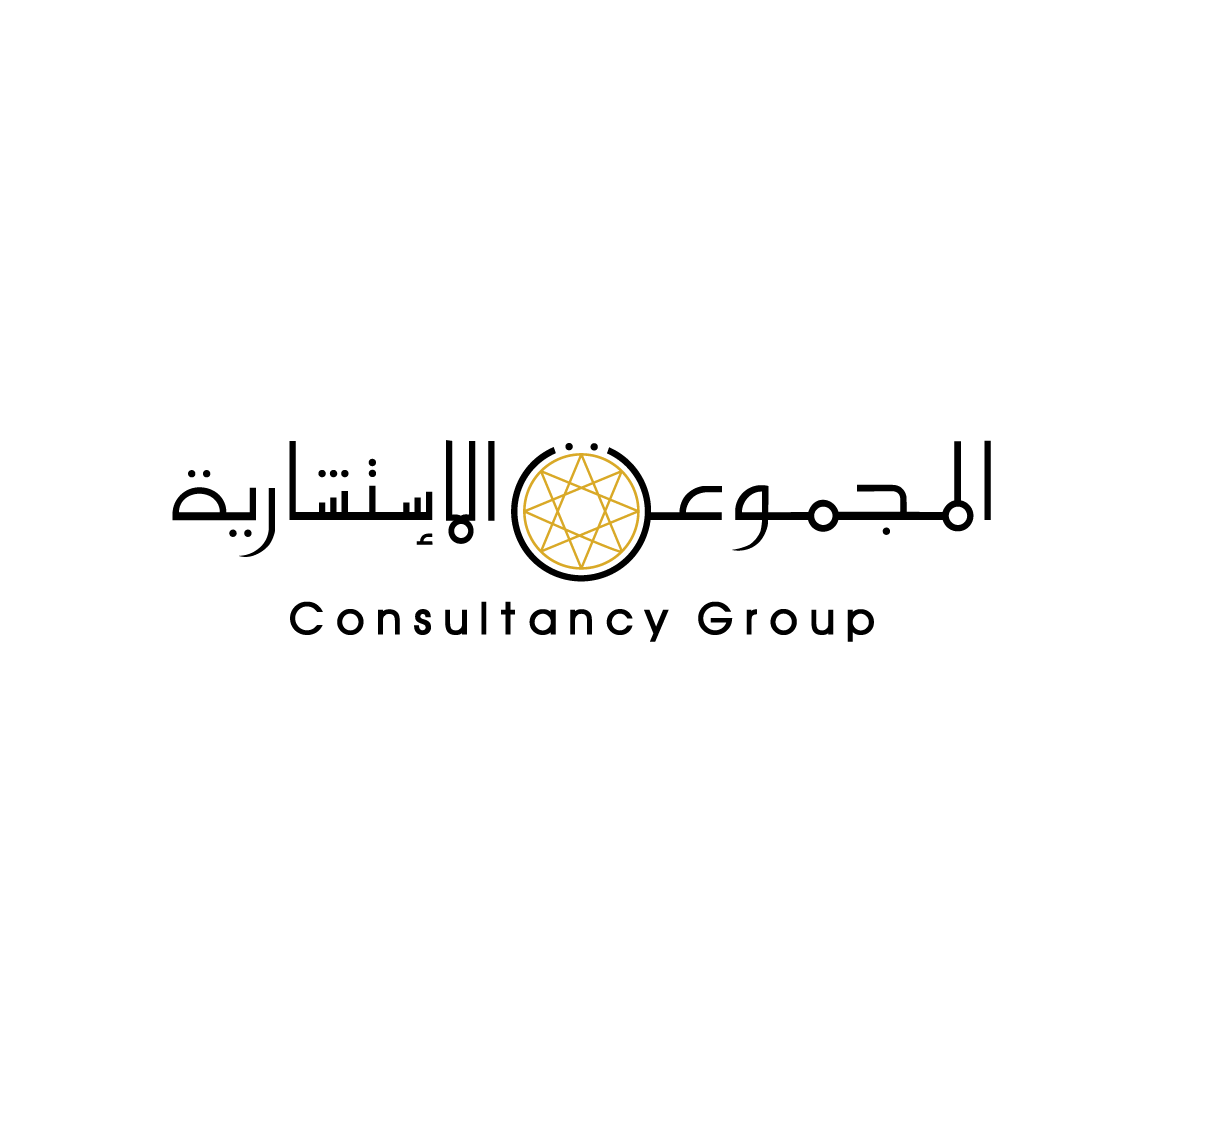 CG Consultancy Group